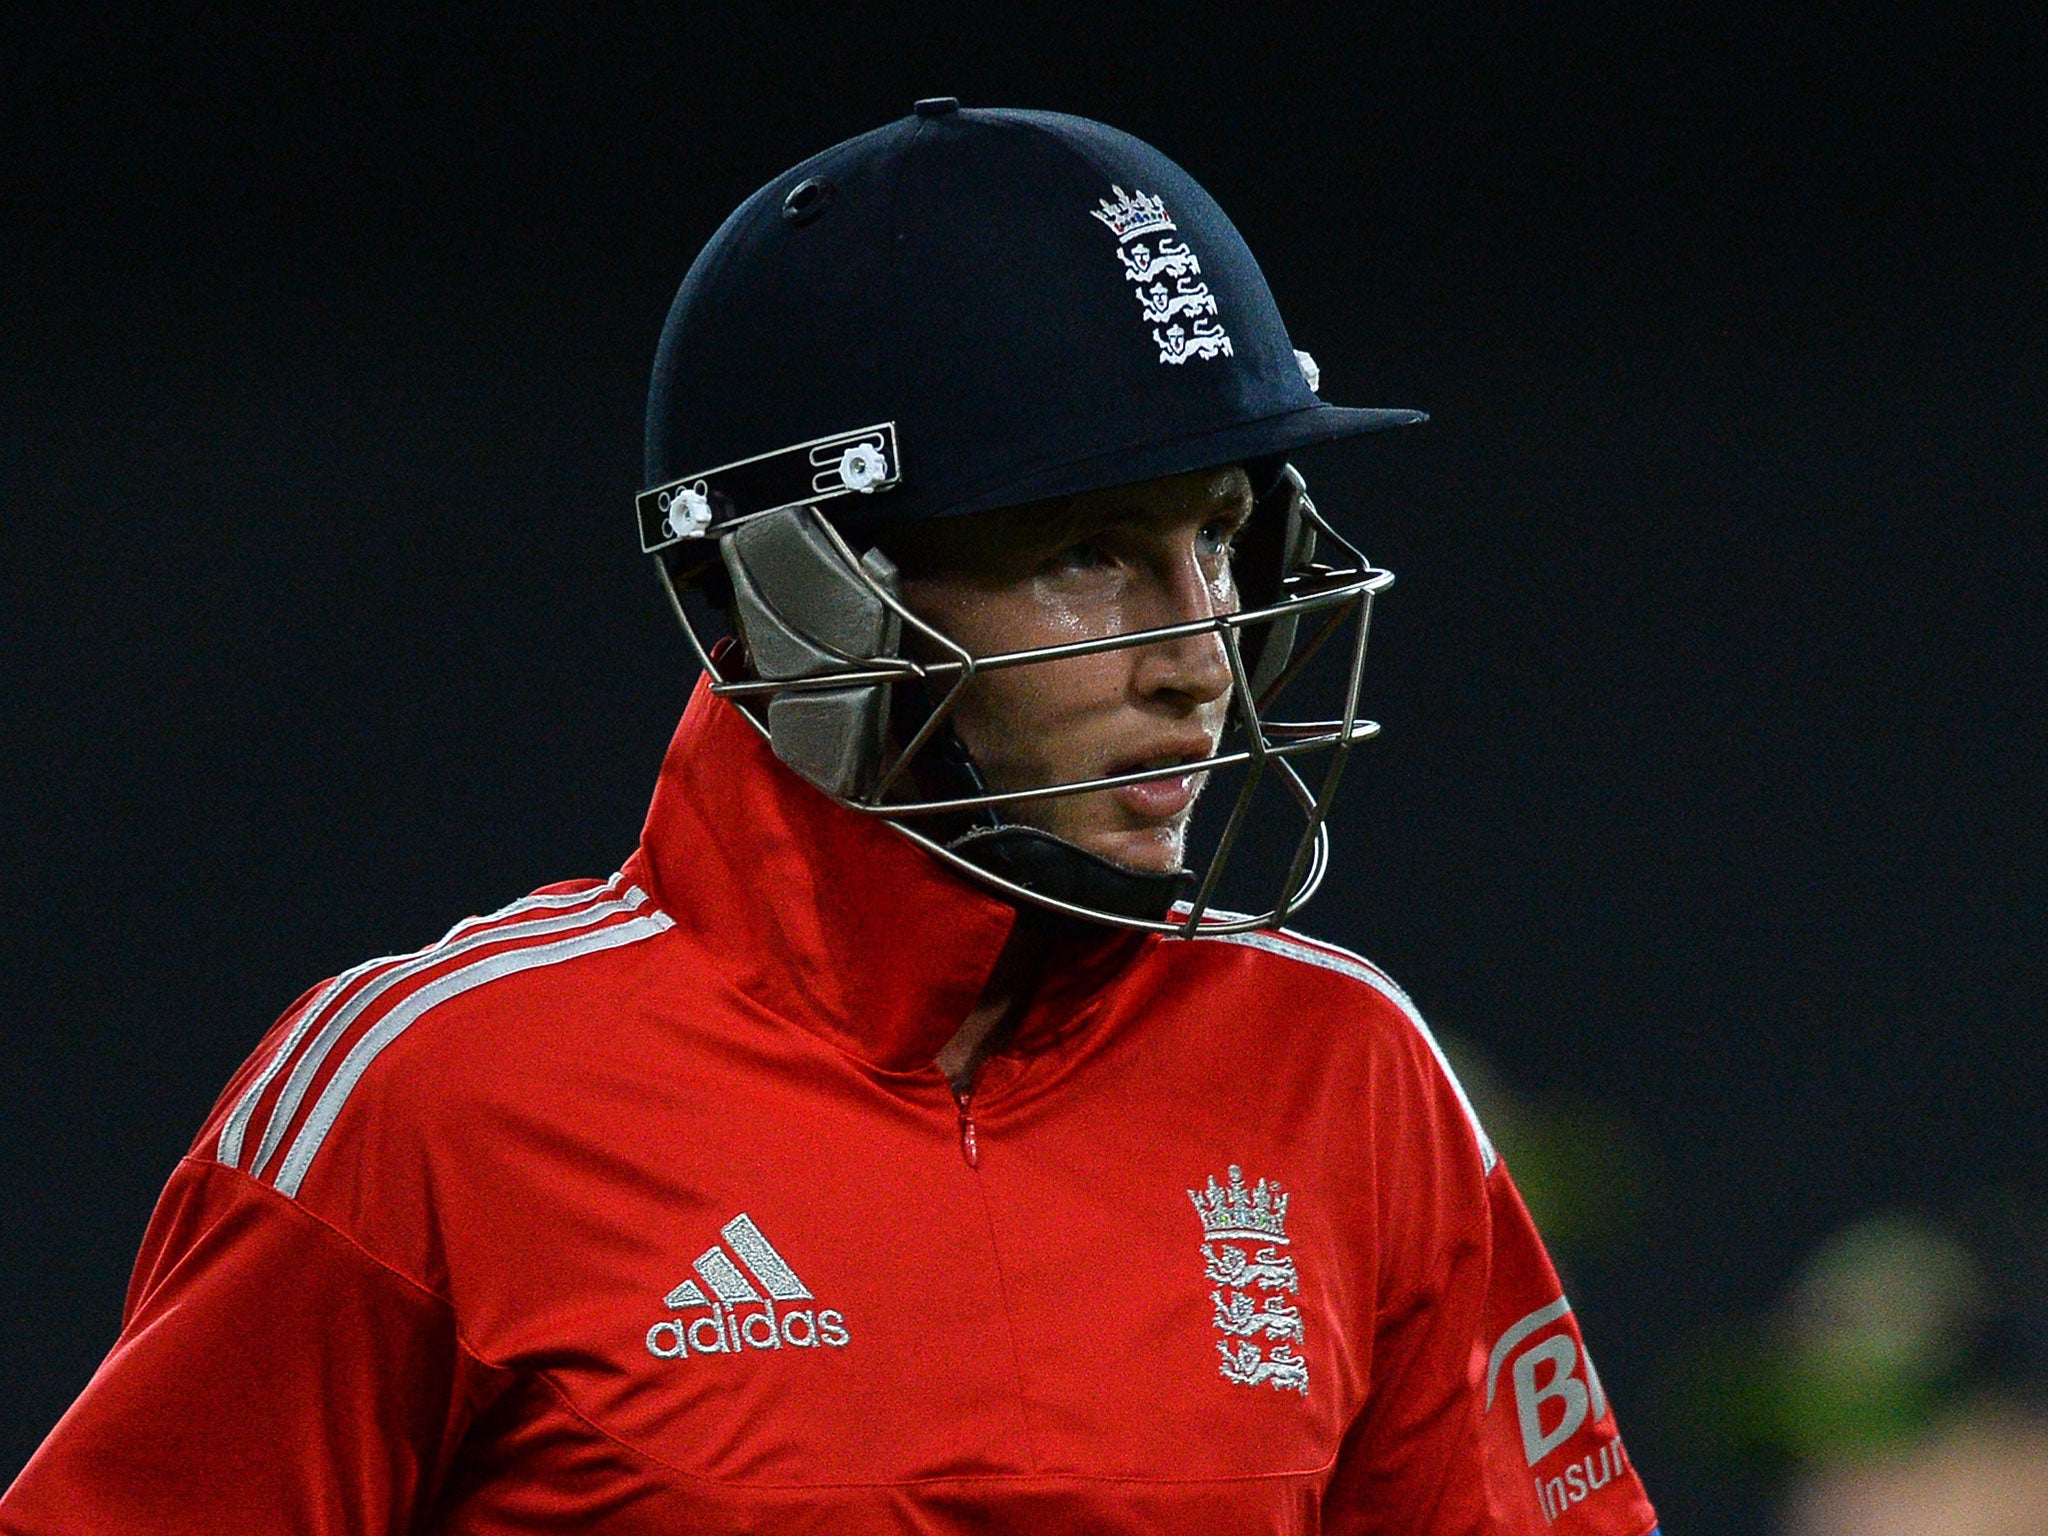 Joe Root hopes to be playing again at the end of next month after fracturing his thumb in Antigua